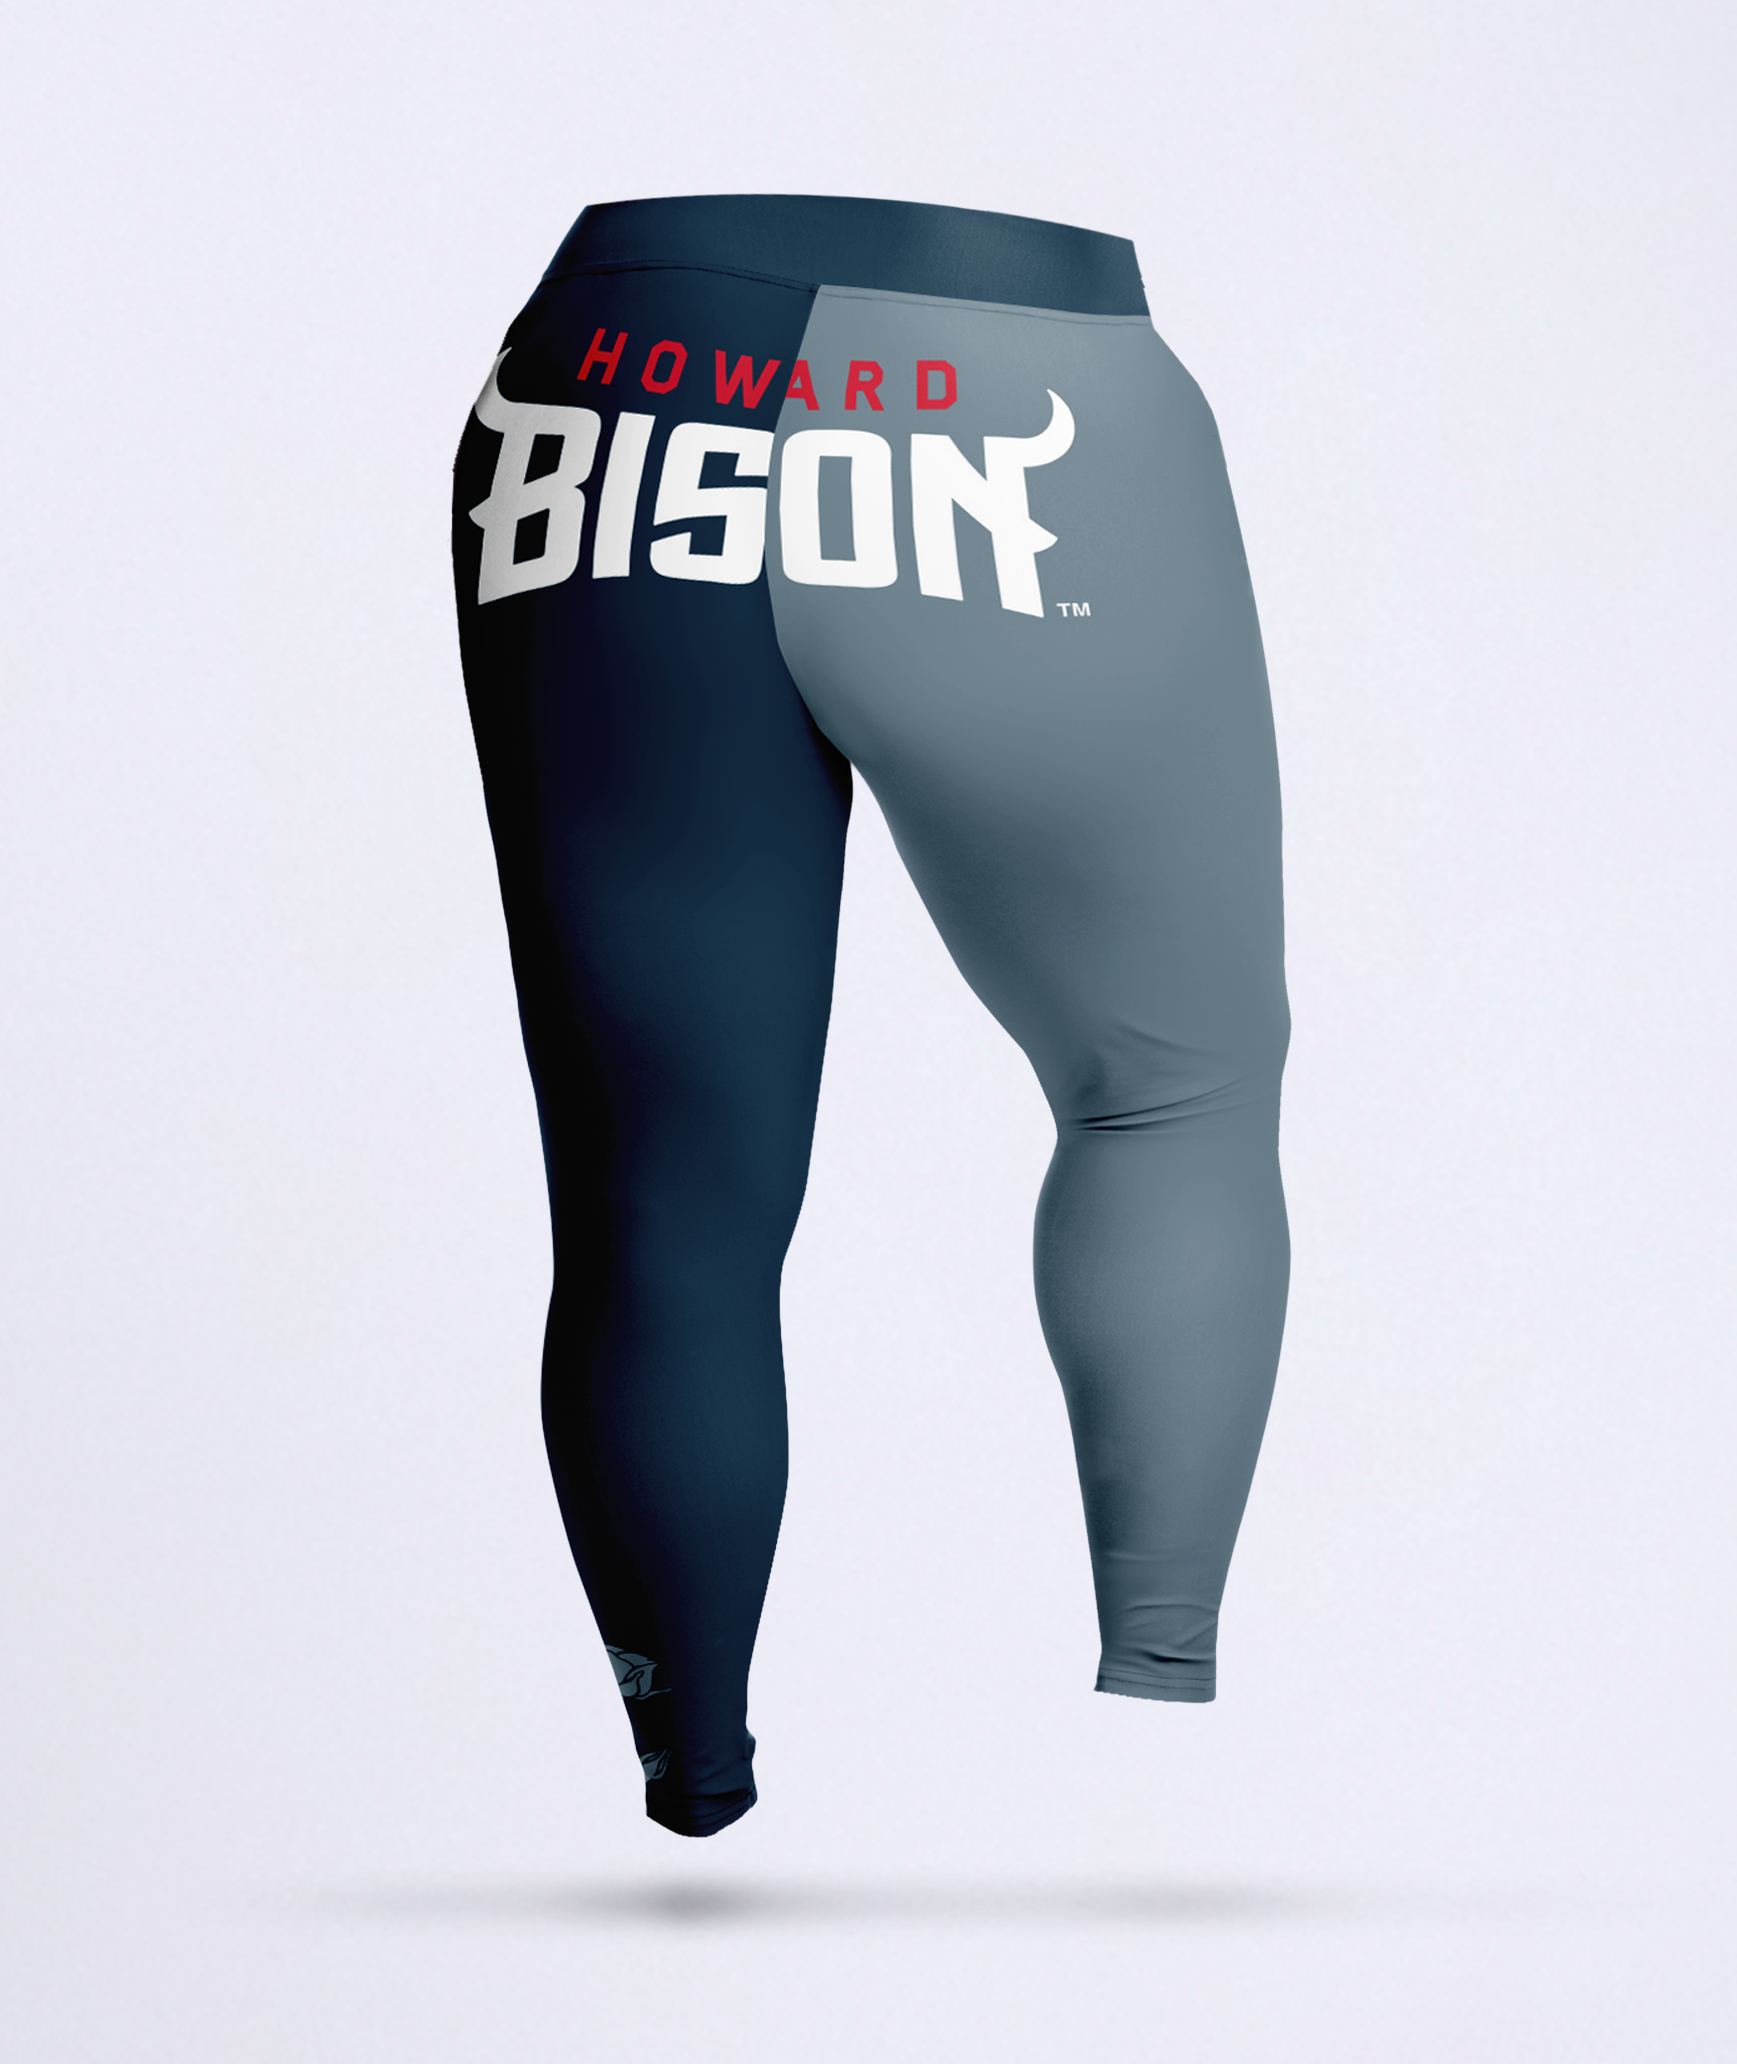 Howard Bison™ Two-Toned Plus Size Leggings